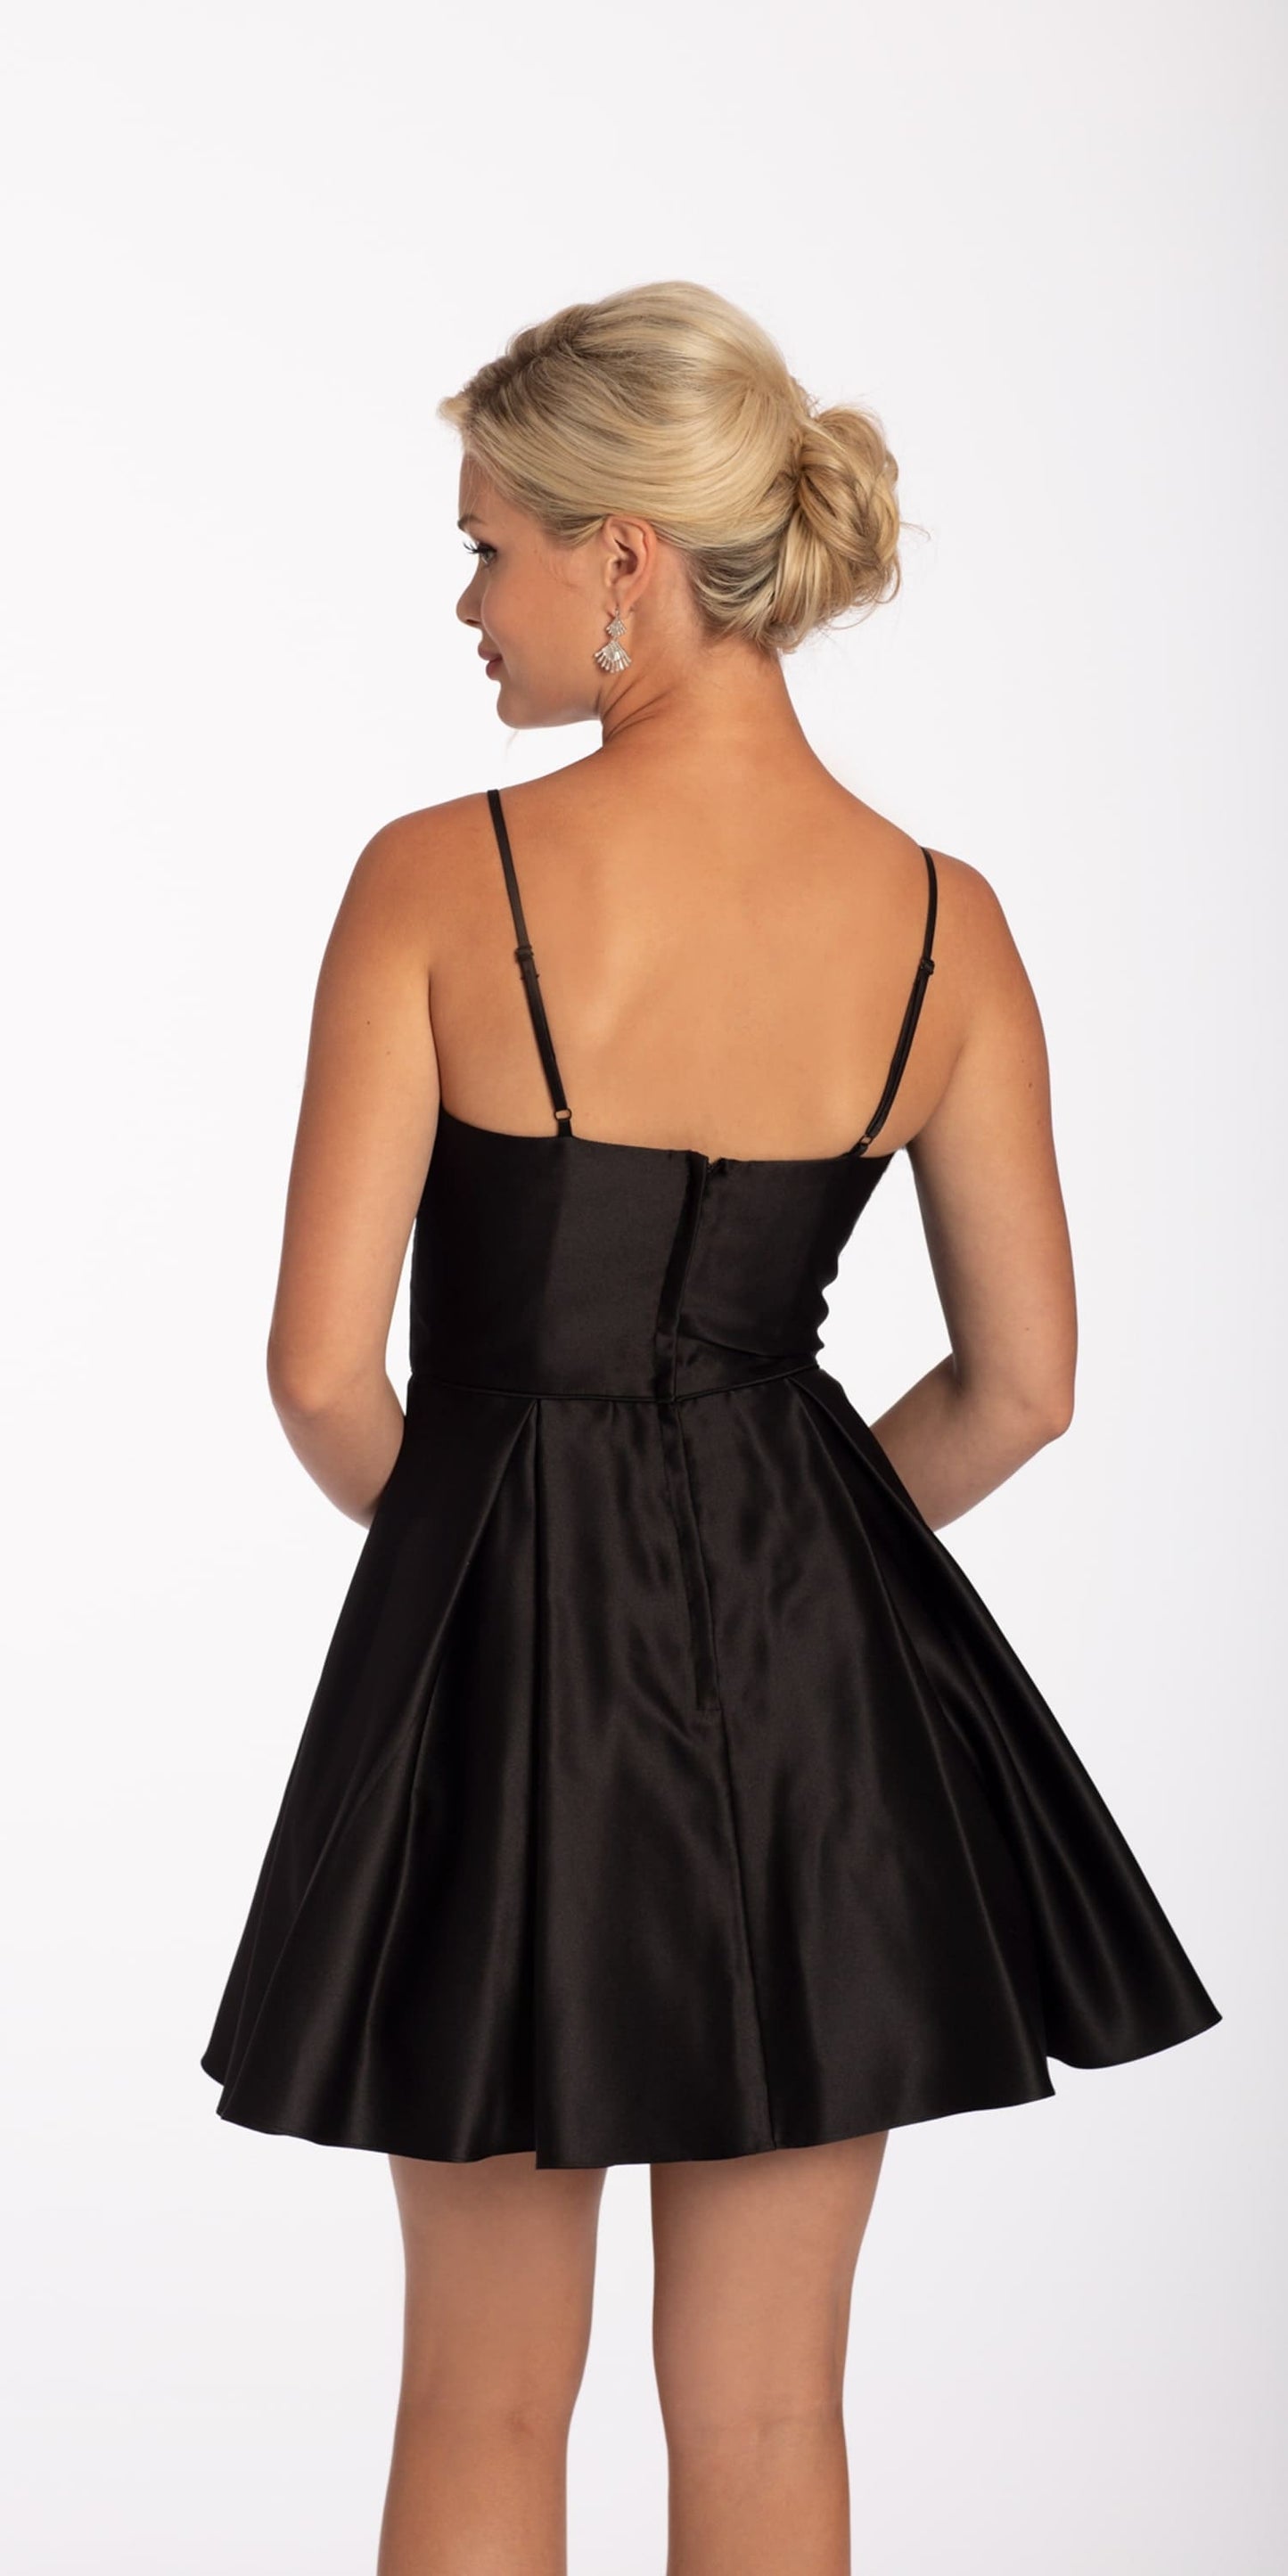 Camille La Vie Pleated Satin Fit and Flare Dress with Feather Detail